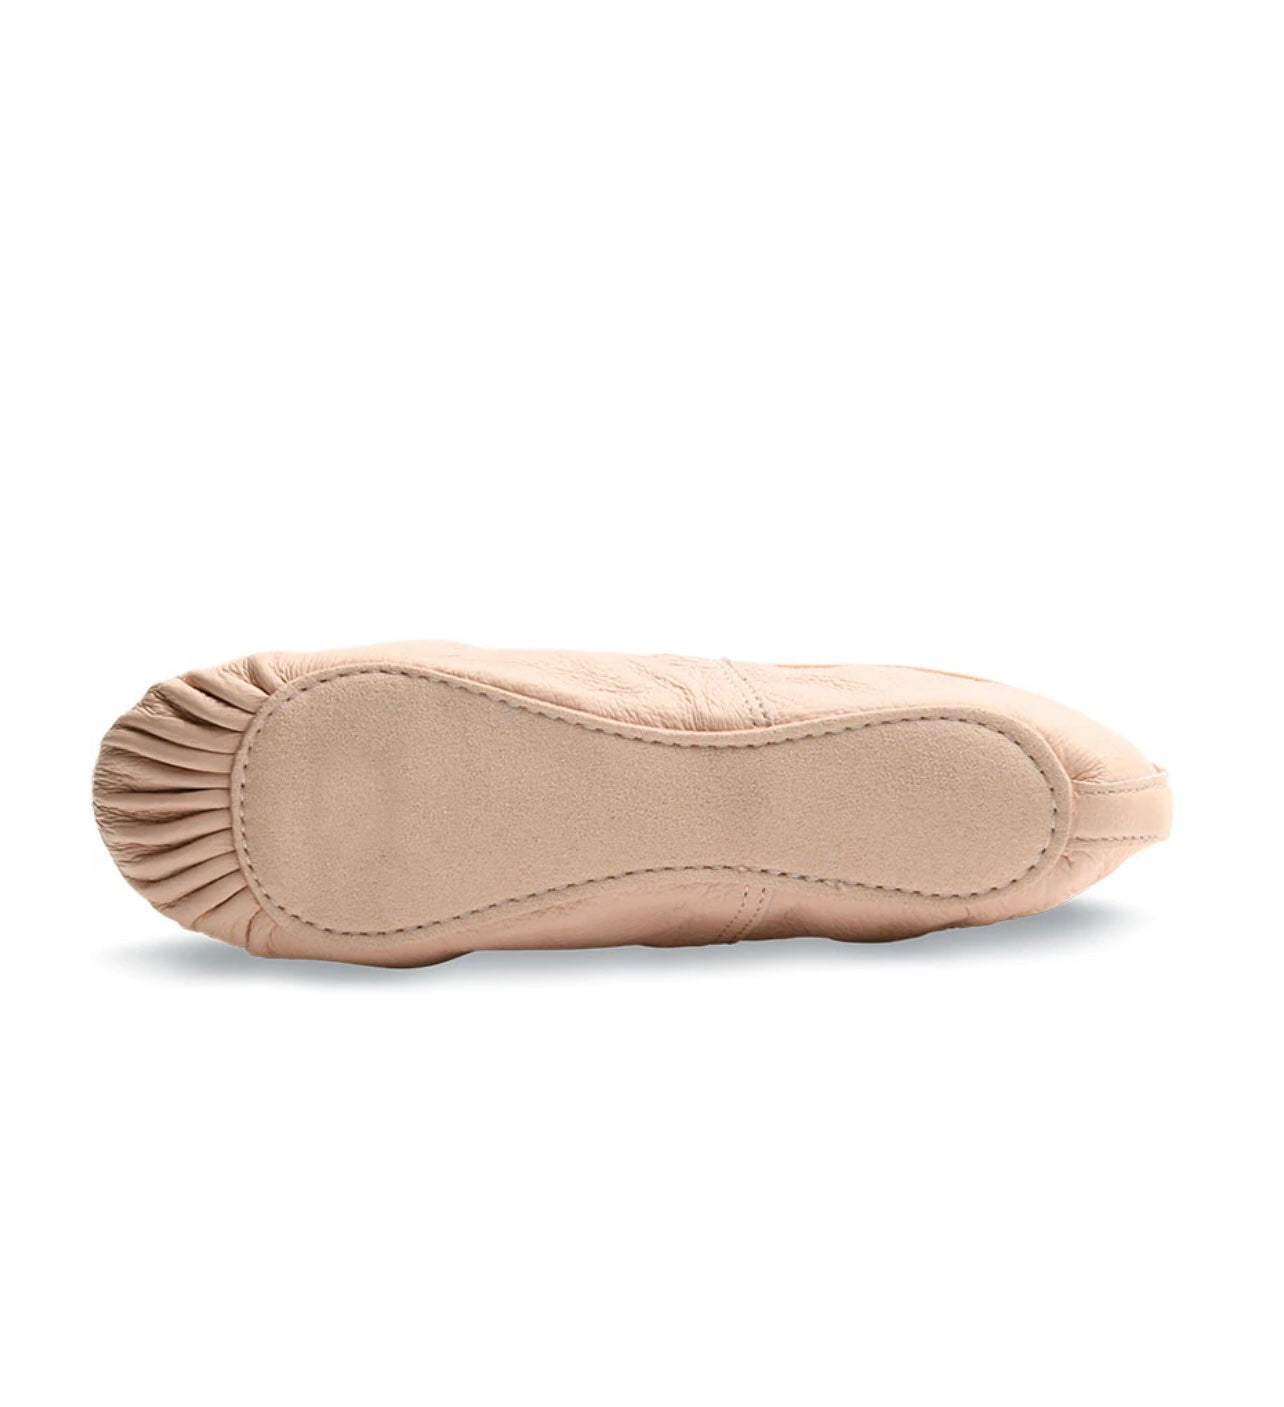 Student Full Sole Leather Ballet Shoe